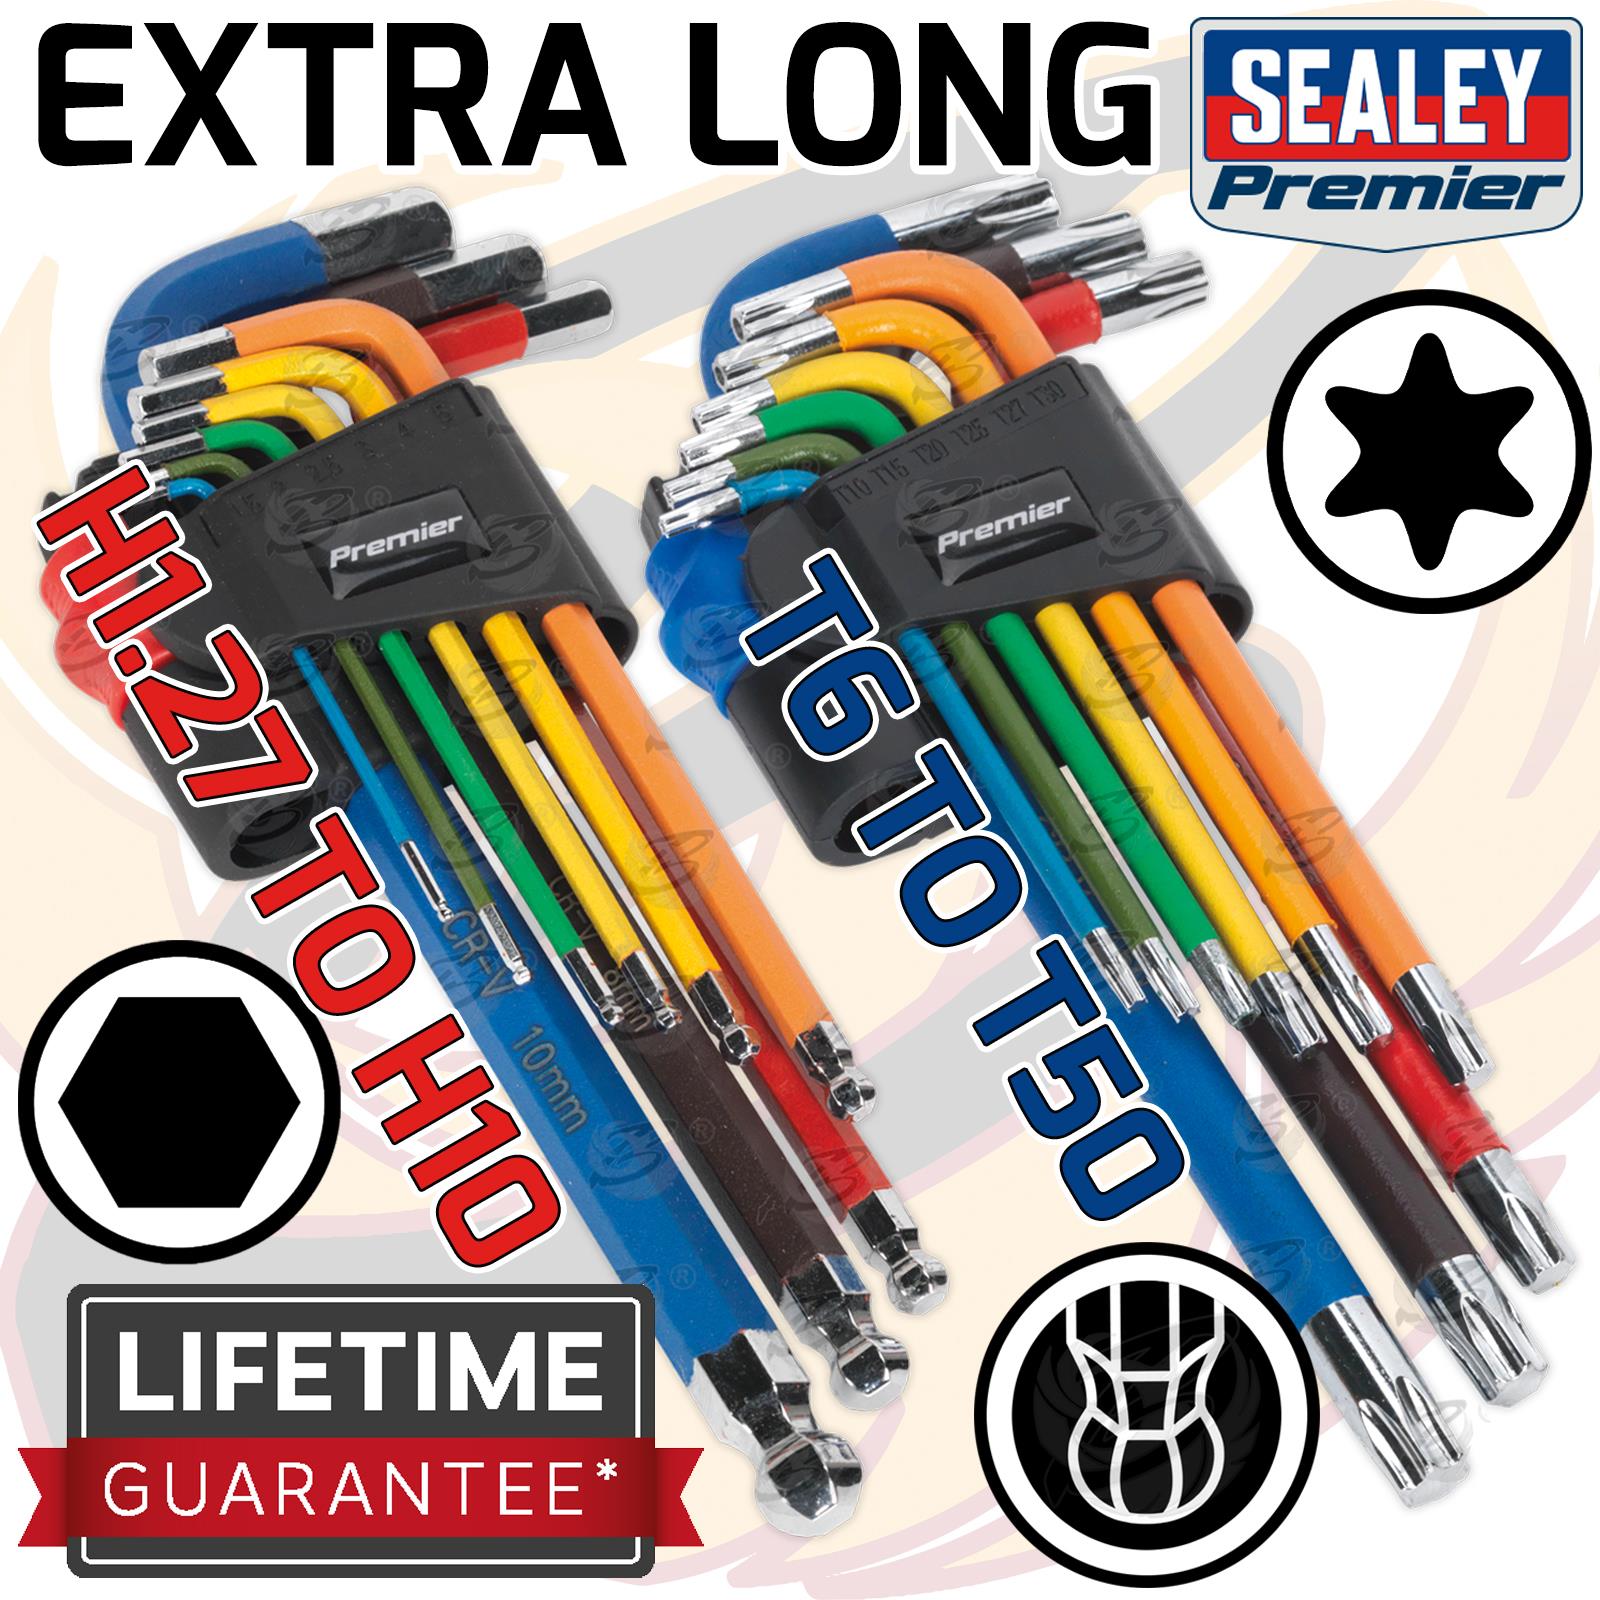 SEALEY 18PCS COLOUR CODED TAMPERPROOF TORX & BALL END HEX KEY SETS ( H1.27 - H10 ) ( T6 - T50 )